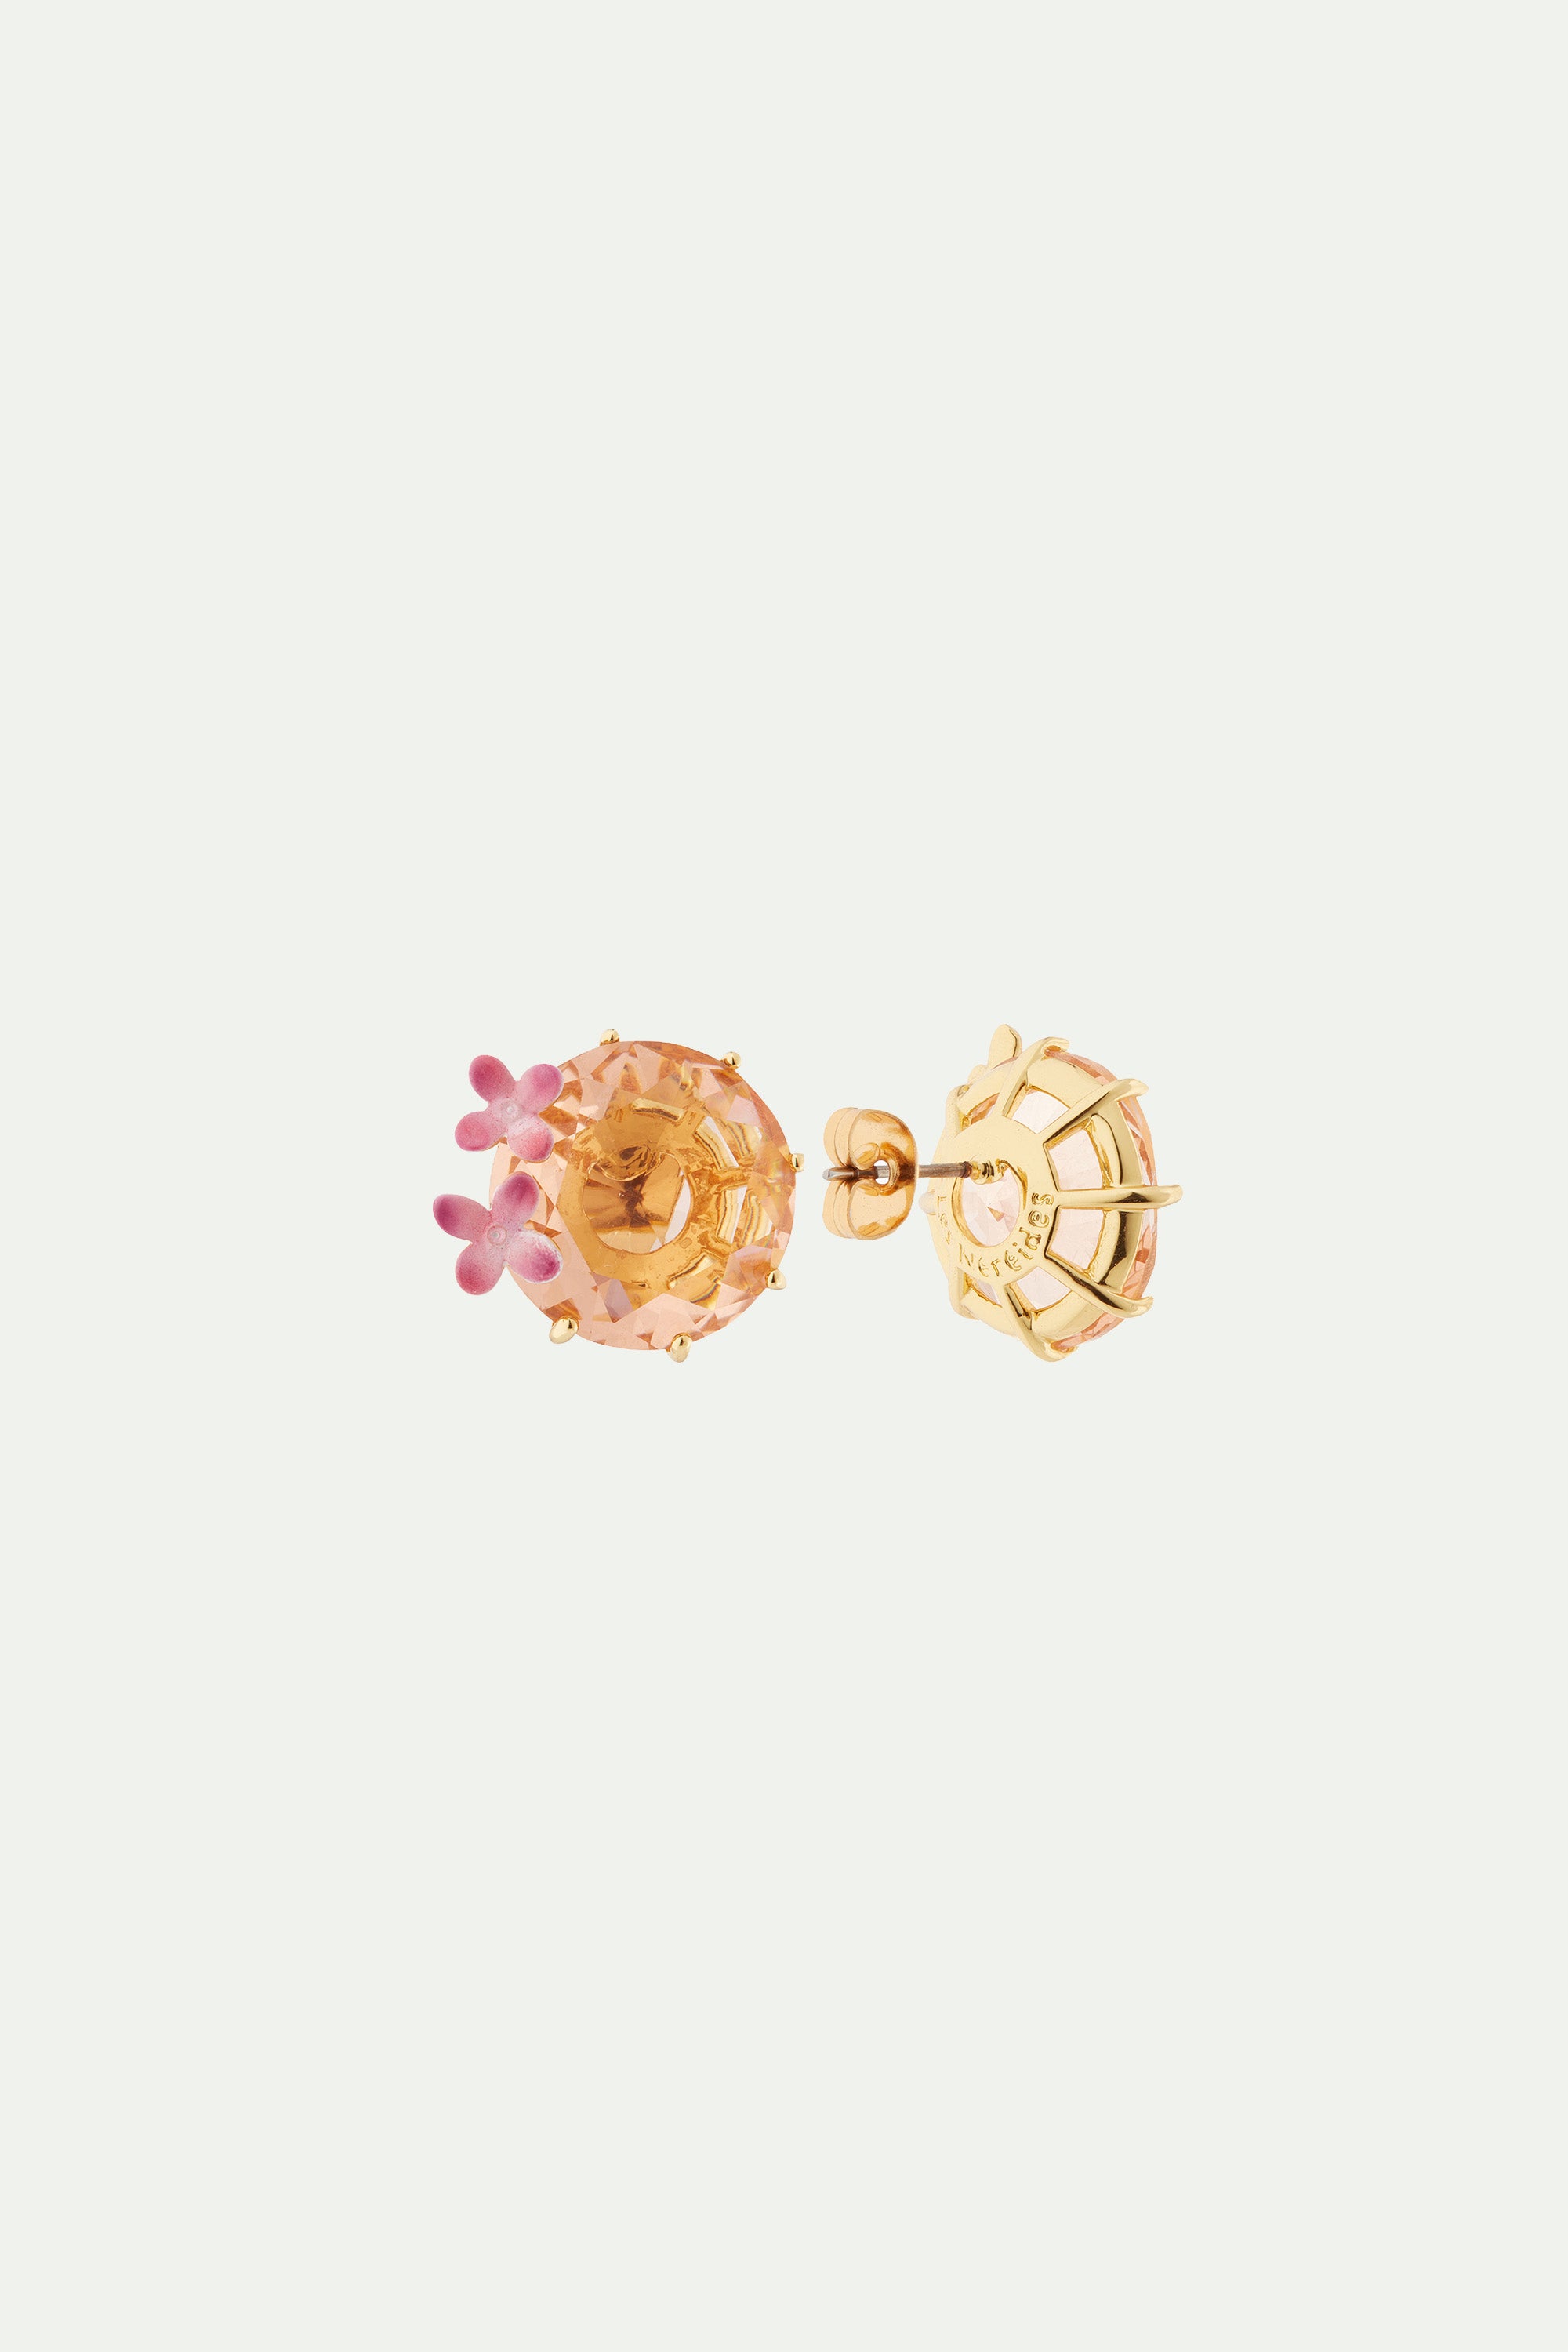 Apricot pink diamantine flower and round stone post earrings